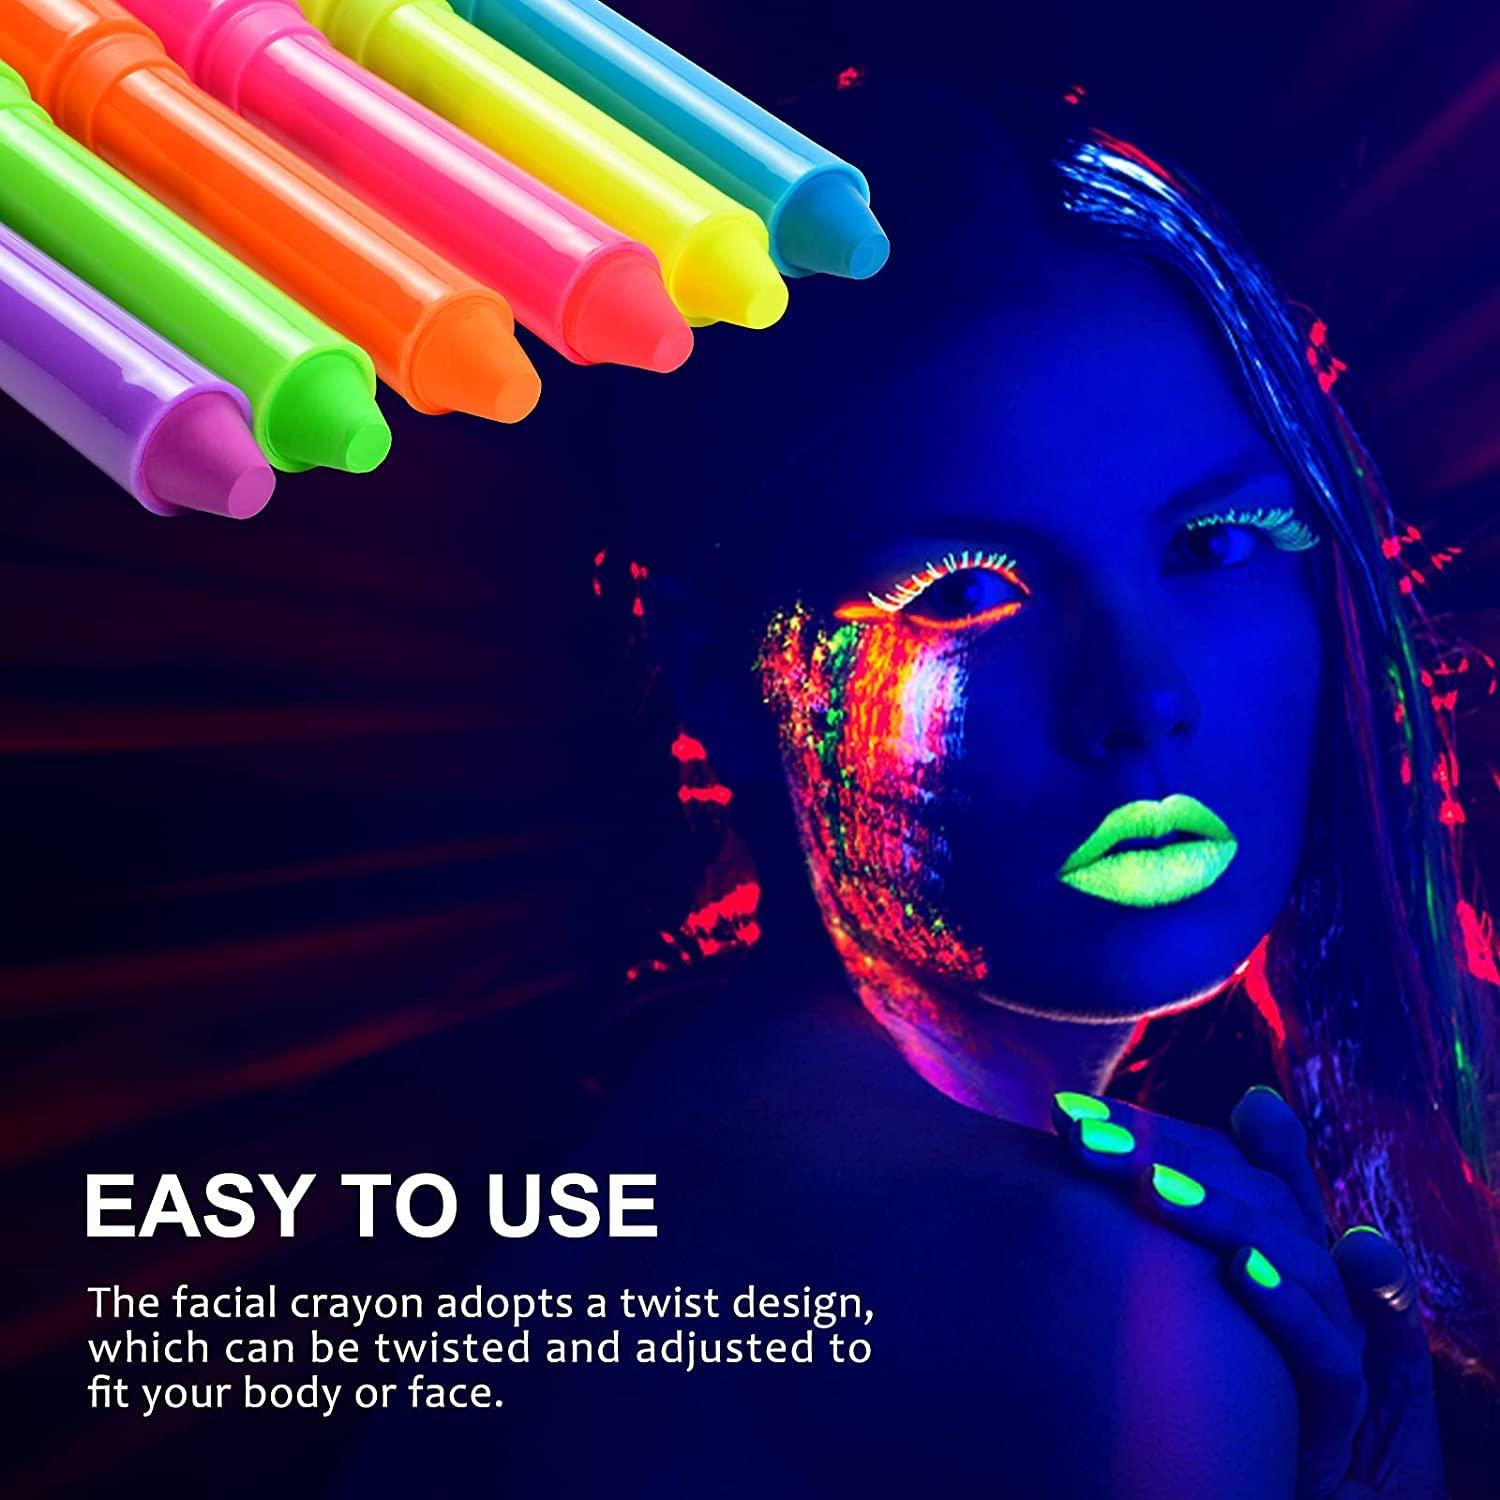 6 Pcs Glow in the Dark Face Body Paint,Blacklight Neon Face & Body  Paints,Easily Cleanable Face & Body Paint Set Neon Body Makeup Glow in the  Dark